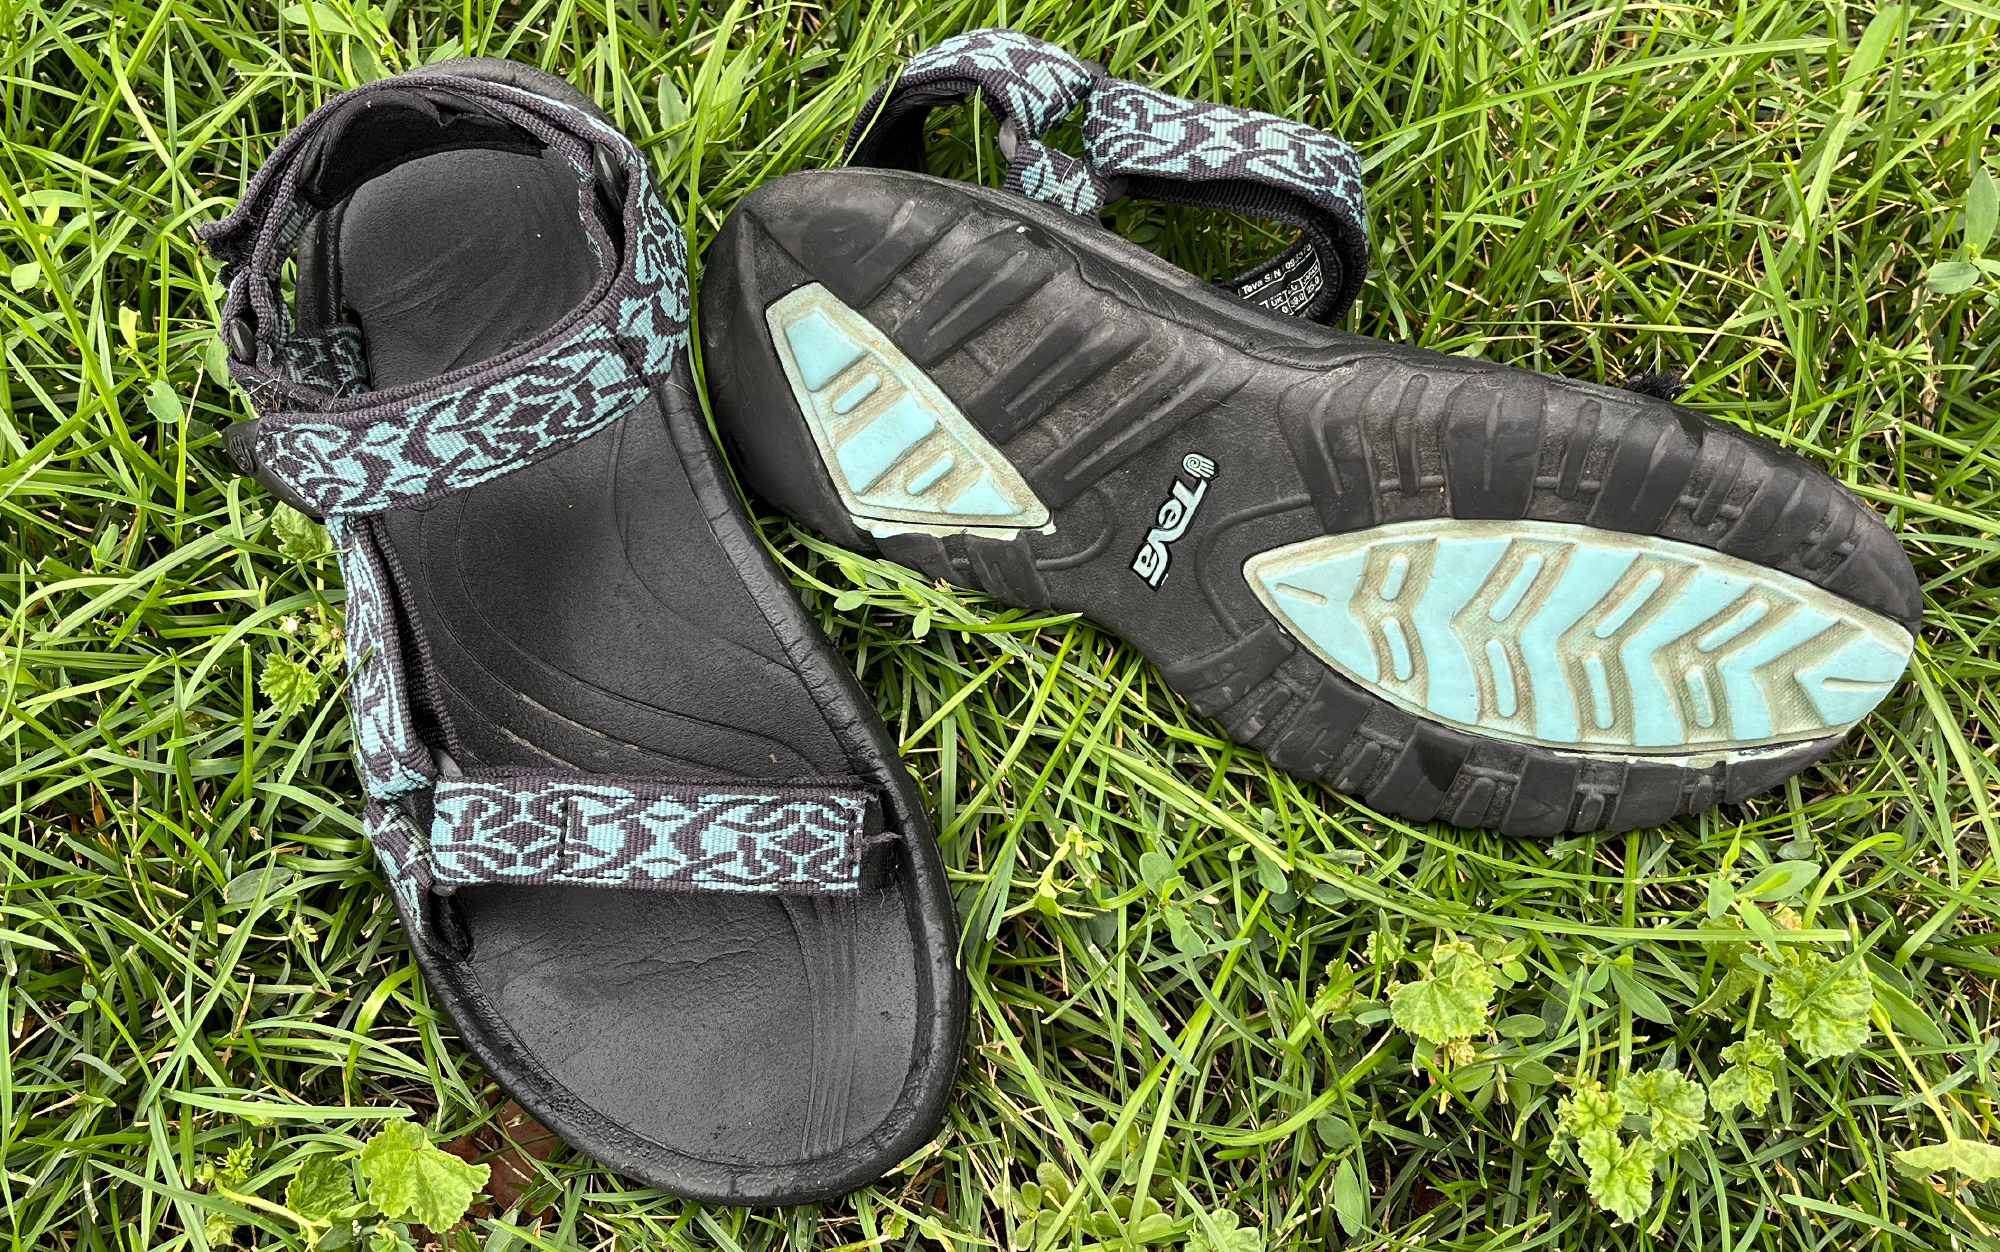 An Expert Guide to Hiking Sandals | Curated.com